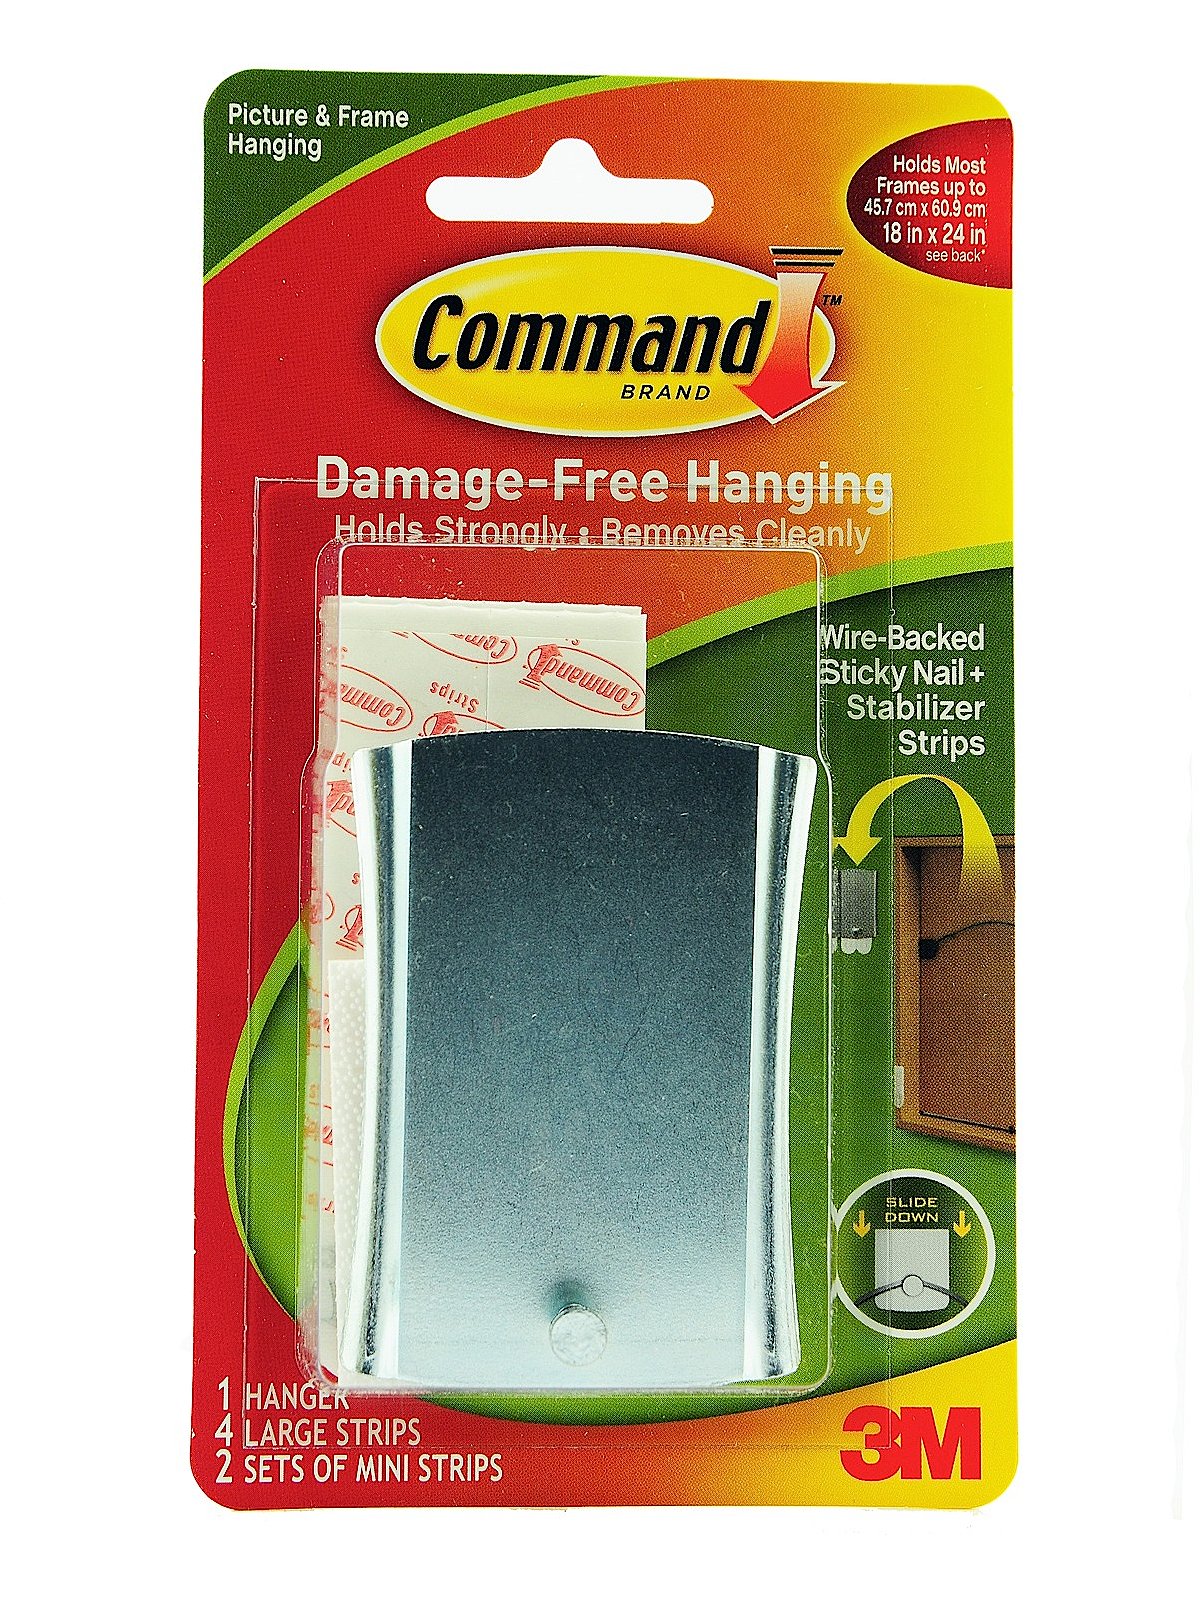 3M Command Sticky Nail Wire-backed Metal Hanger, 3m command 